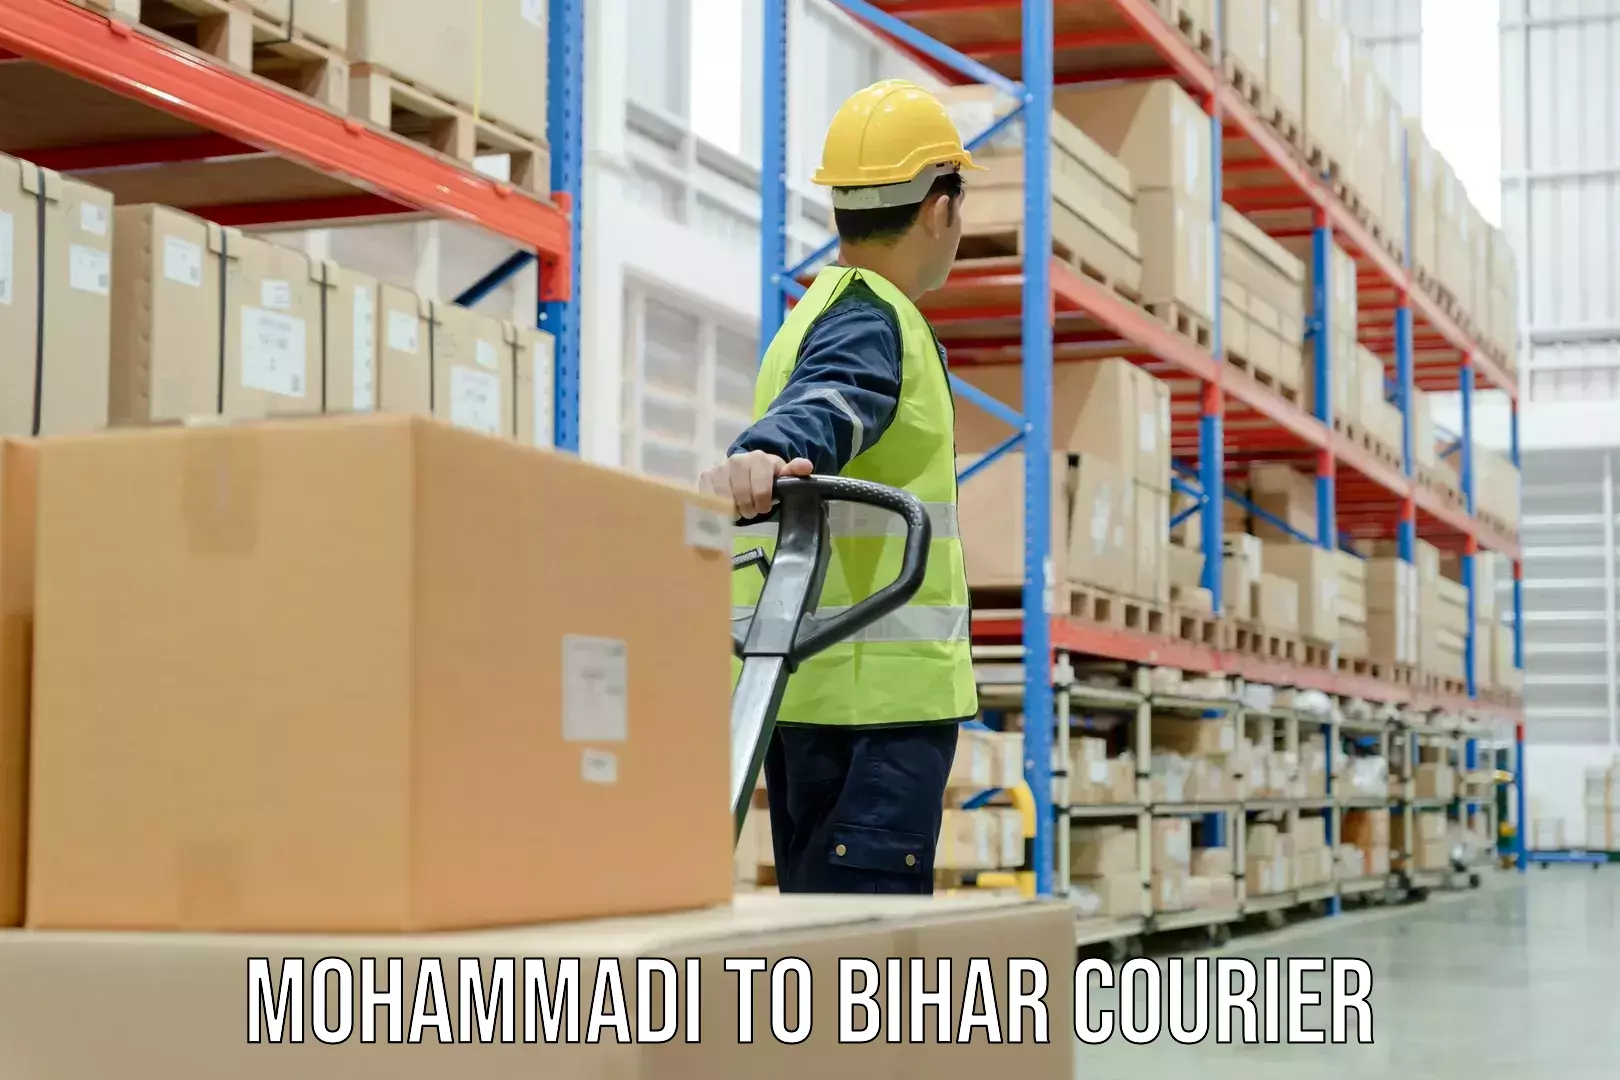 On-call courier service Mohammadi to Bihar